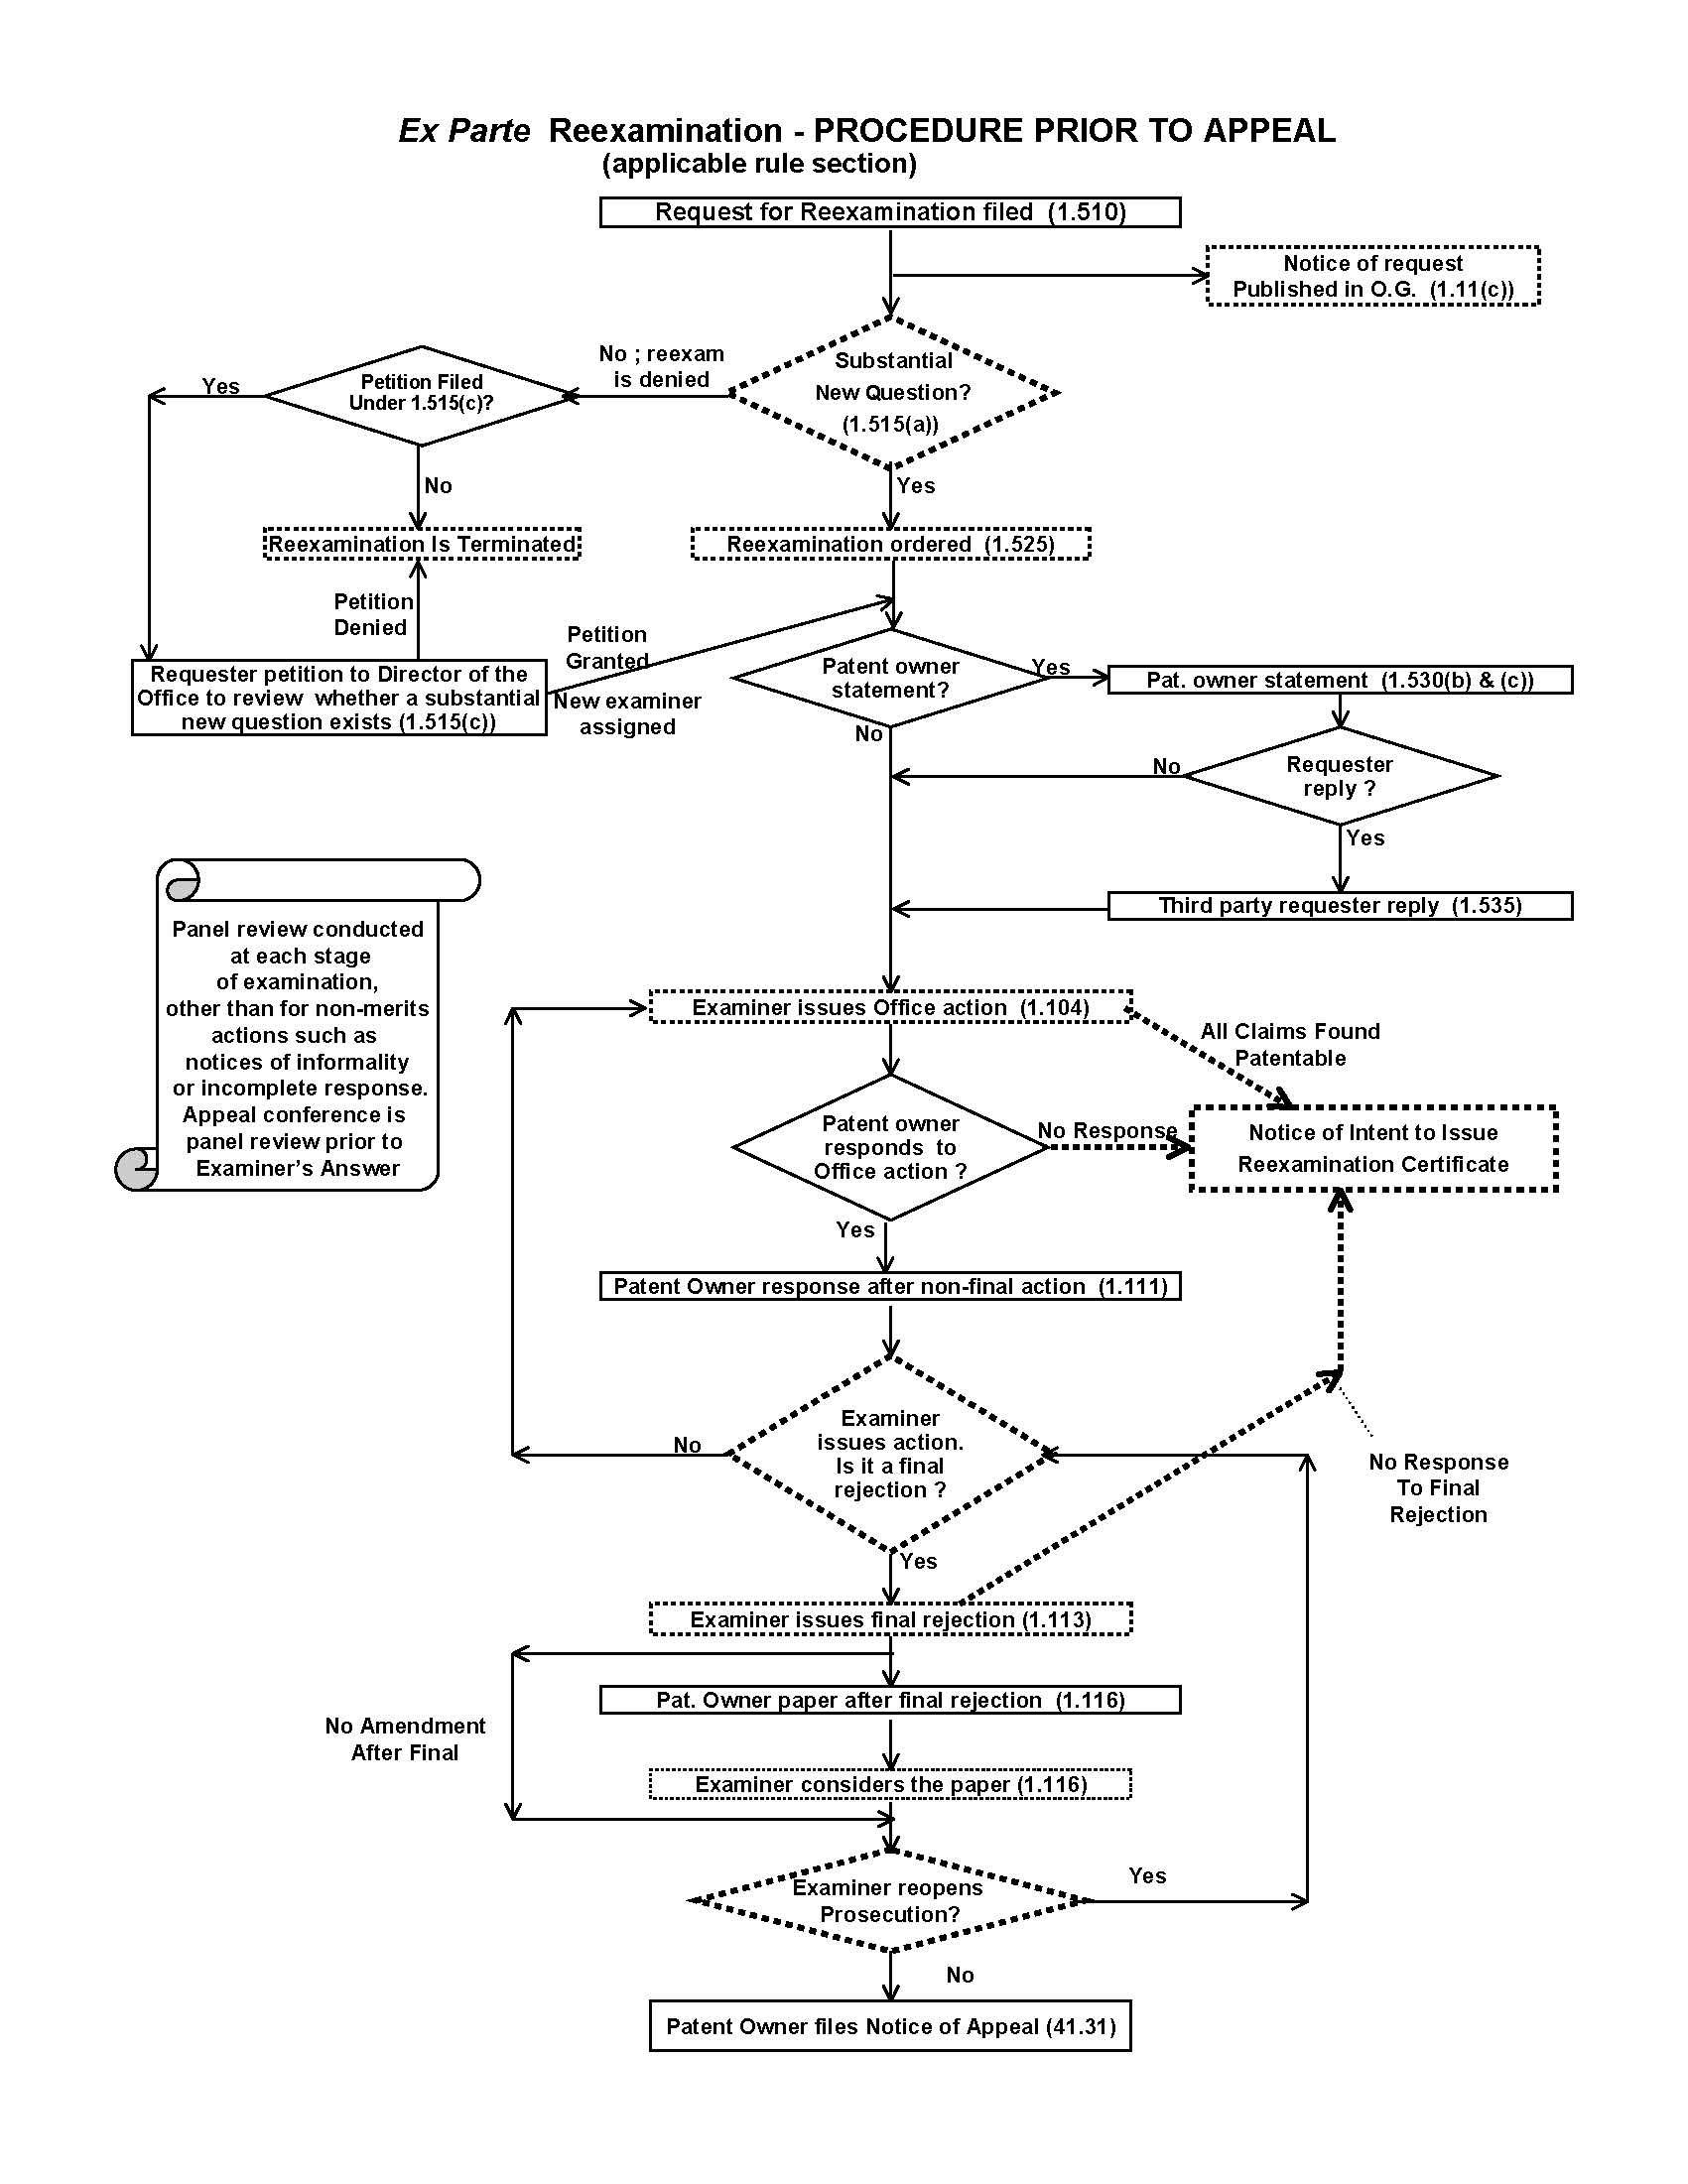 Flowchart - Ex Part Reexamination - Procedure Prior to Appeal (applicable rule section) (Figure 1)